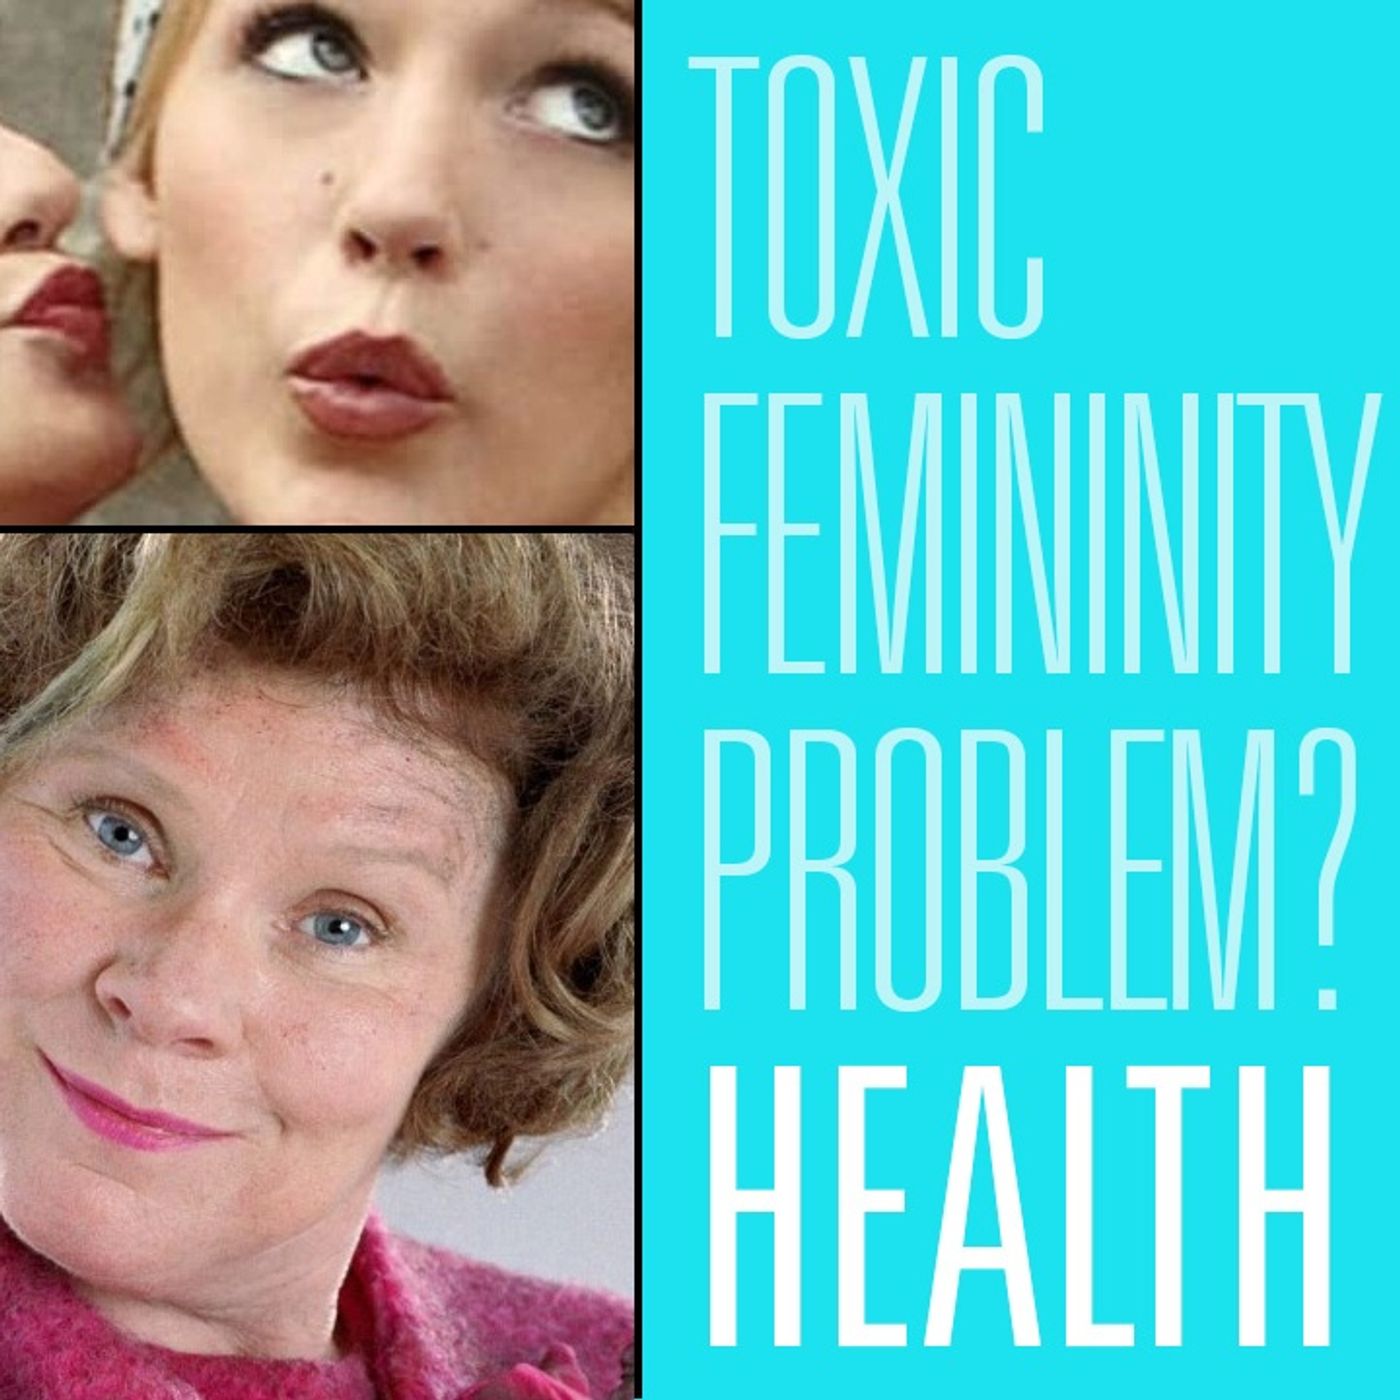 But Toxic Femininity Is a Problem Too! Or is it? | Men's Mental Health 22